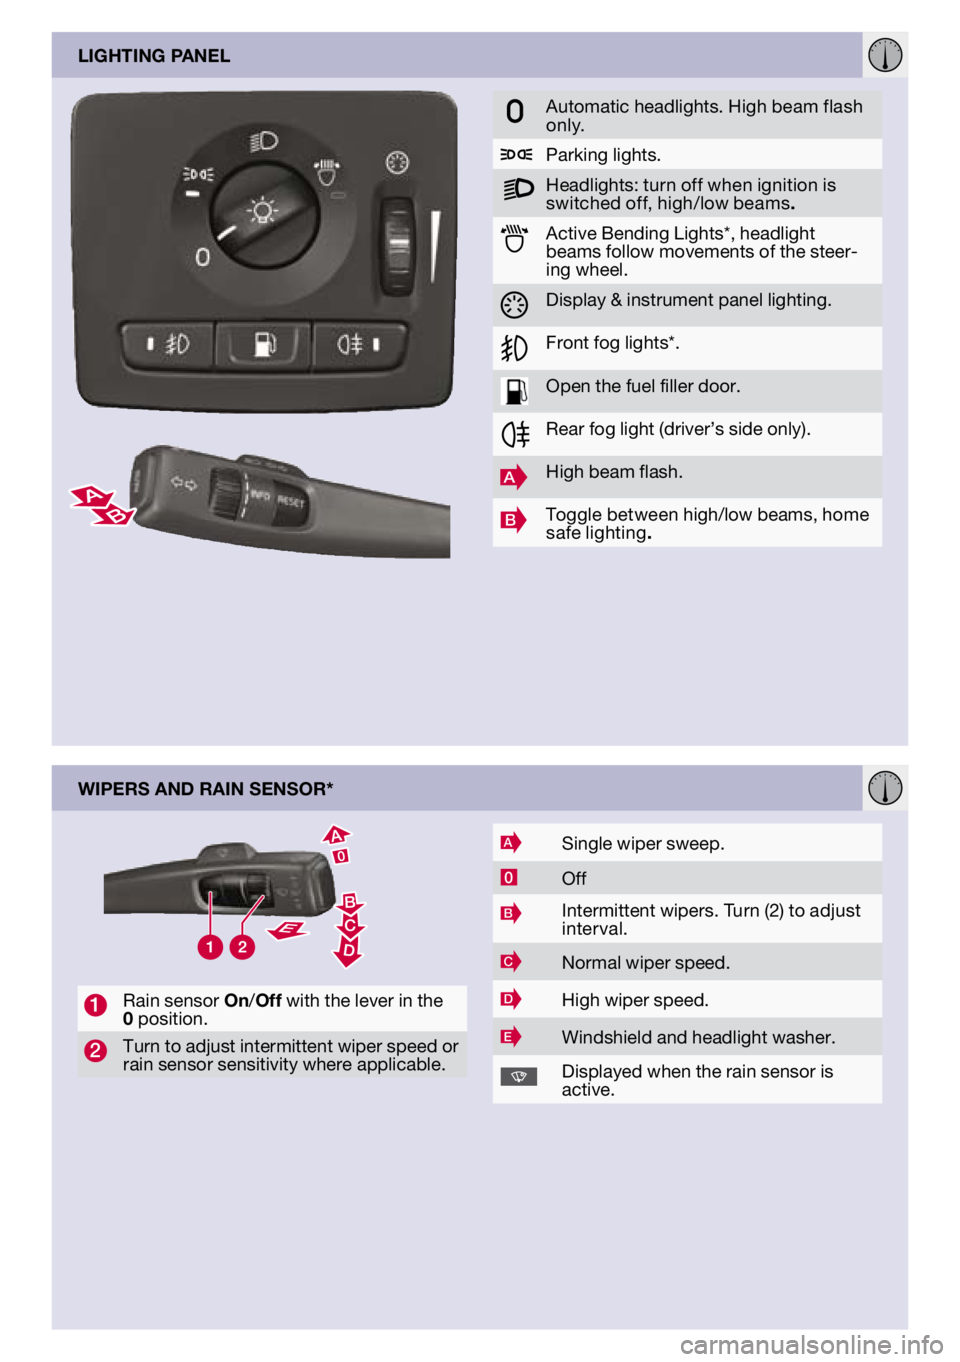 VOLVO S40 2011  Quick Guide 
lIghtIng panel
wIpers and raIn sensor*
1rain sensor on/off with the lever in the 0 position. 
2Turn to adjust intermittent wiper speed or rain sensor sensitivity where applicable.
Asingle wiper sweep